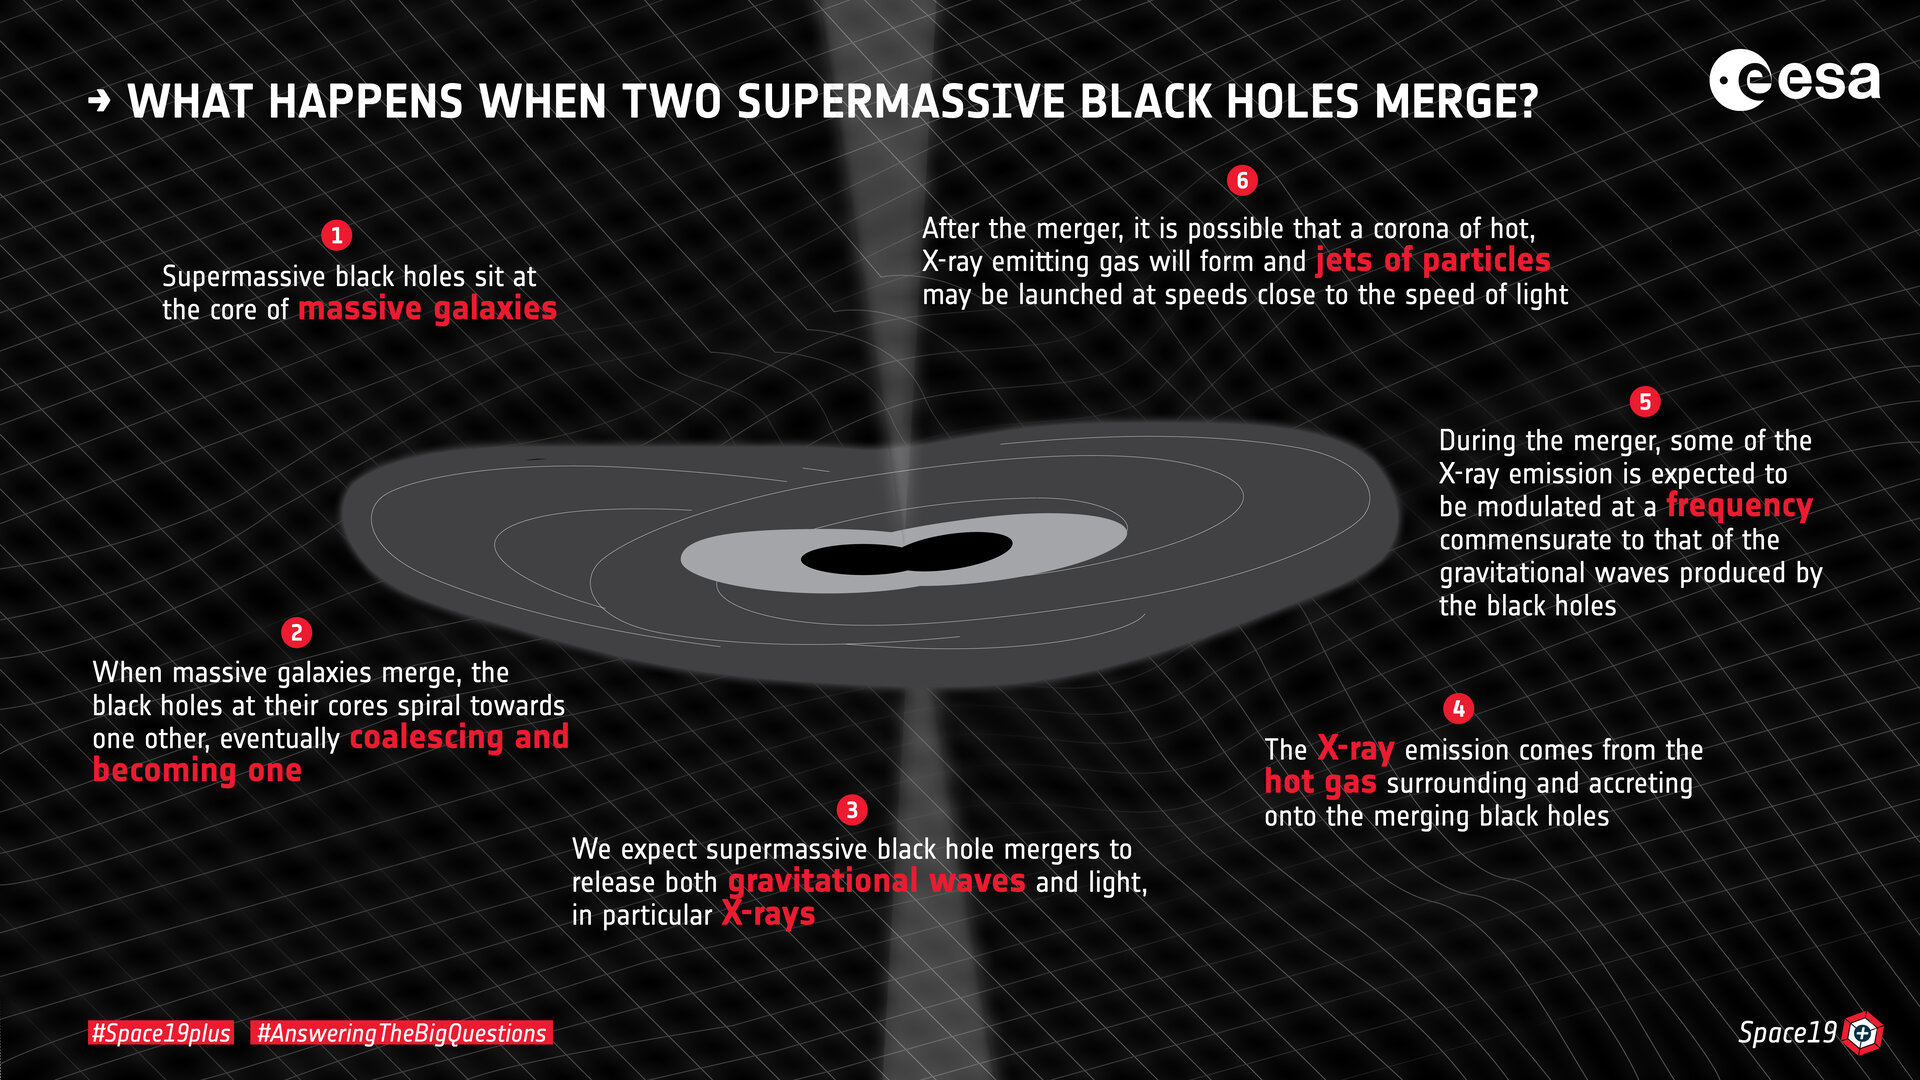 Supermassive black holes lurk at the centre of massive galaxies.